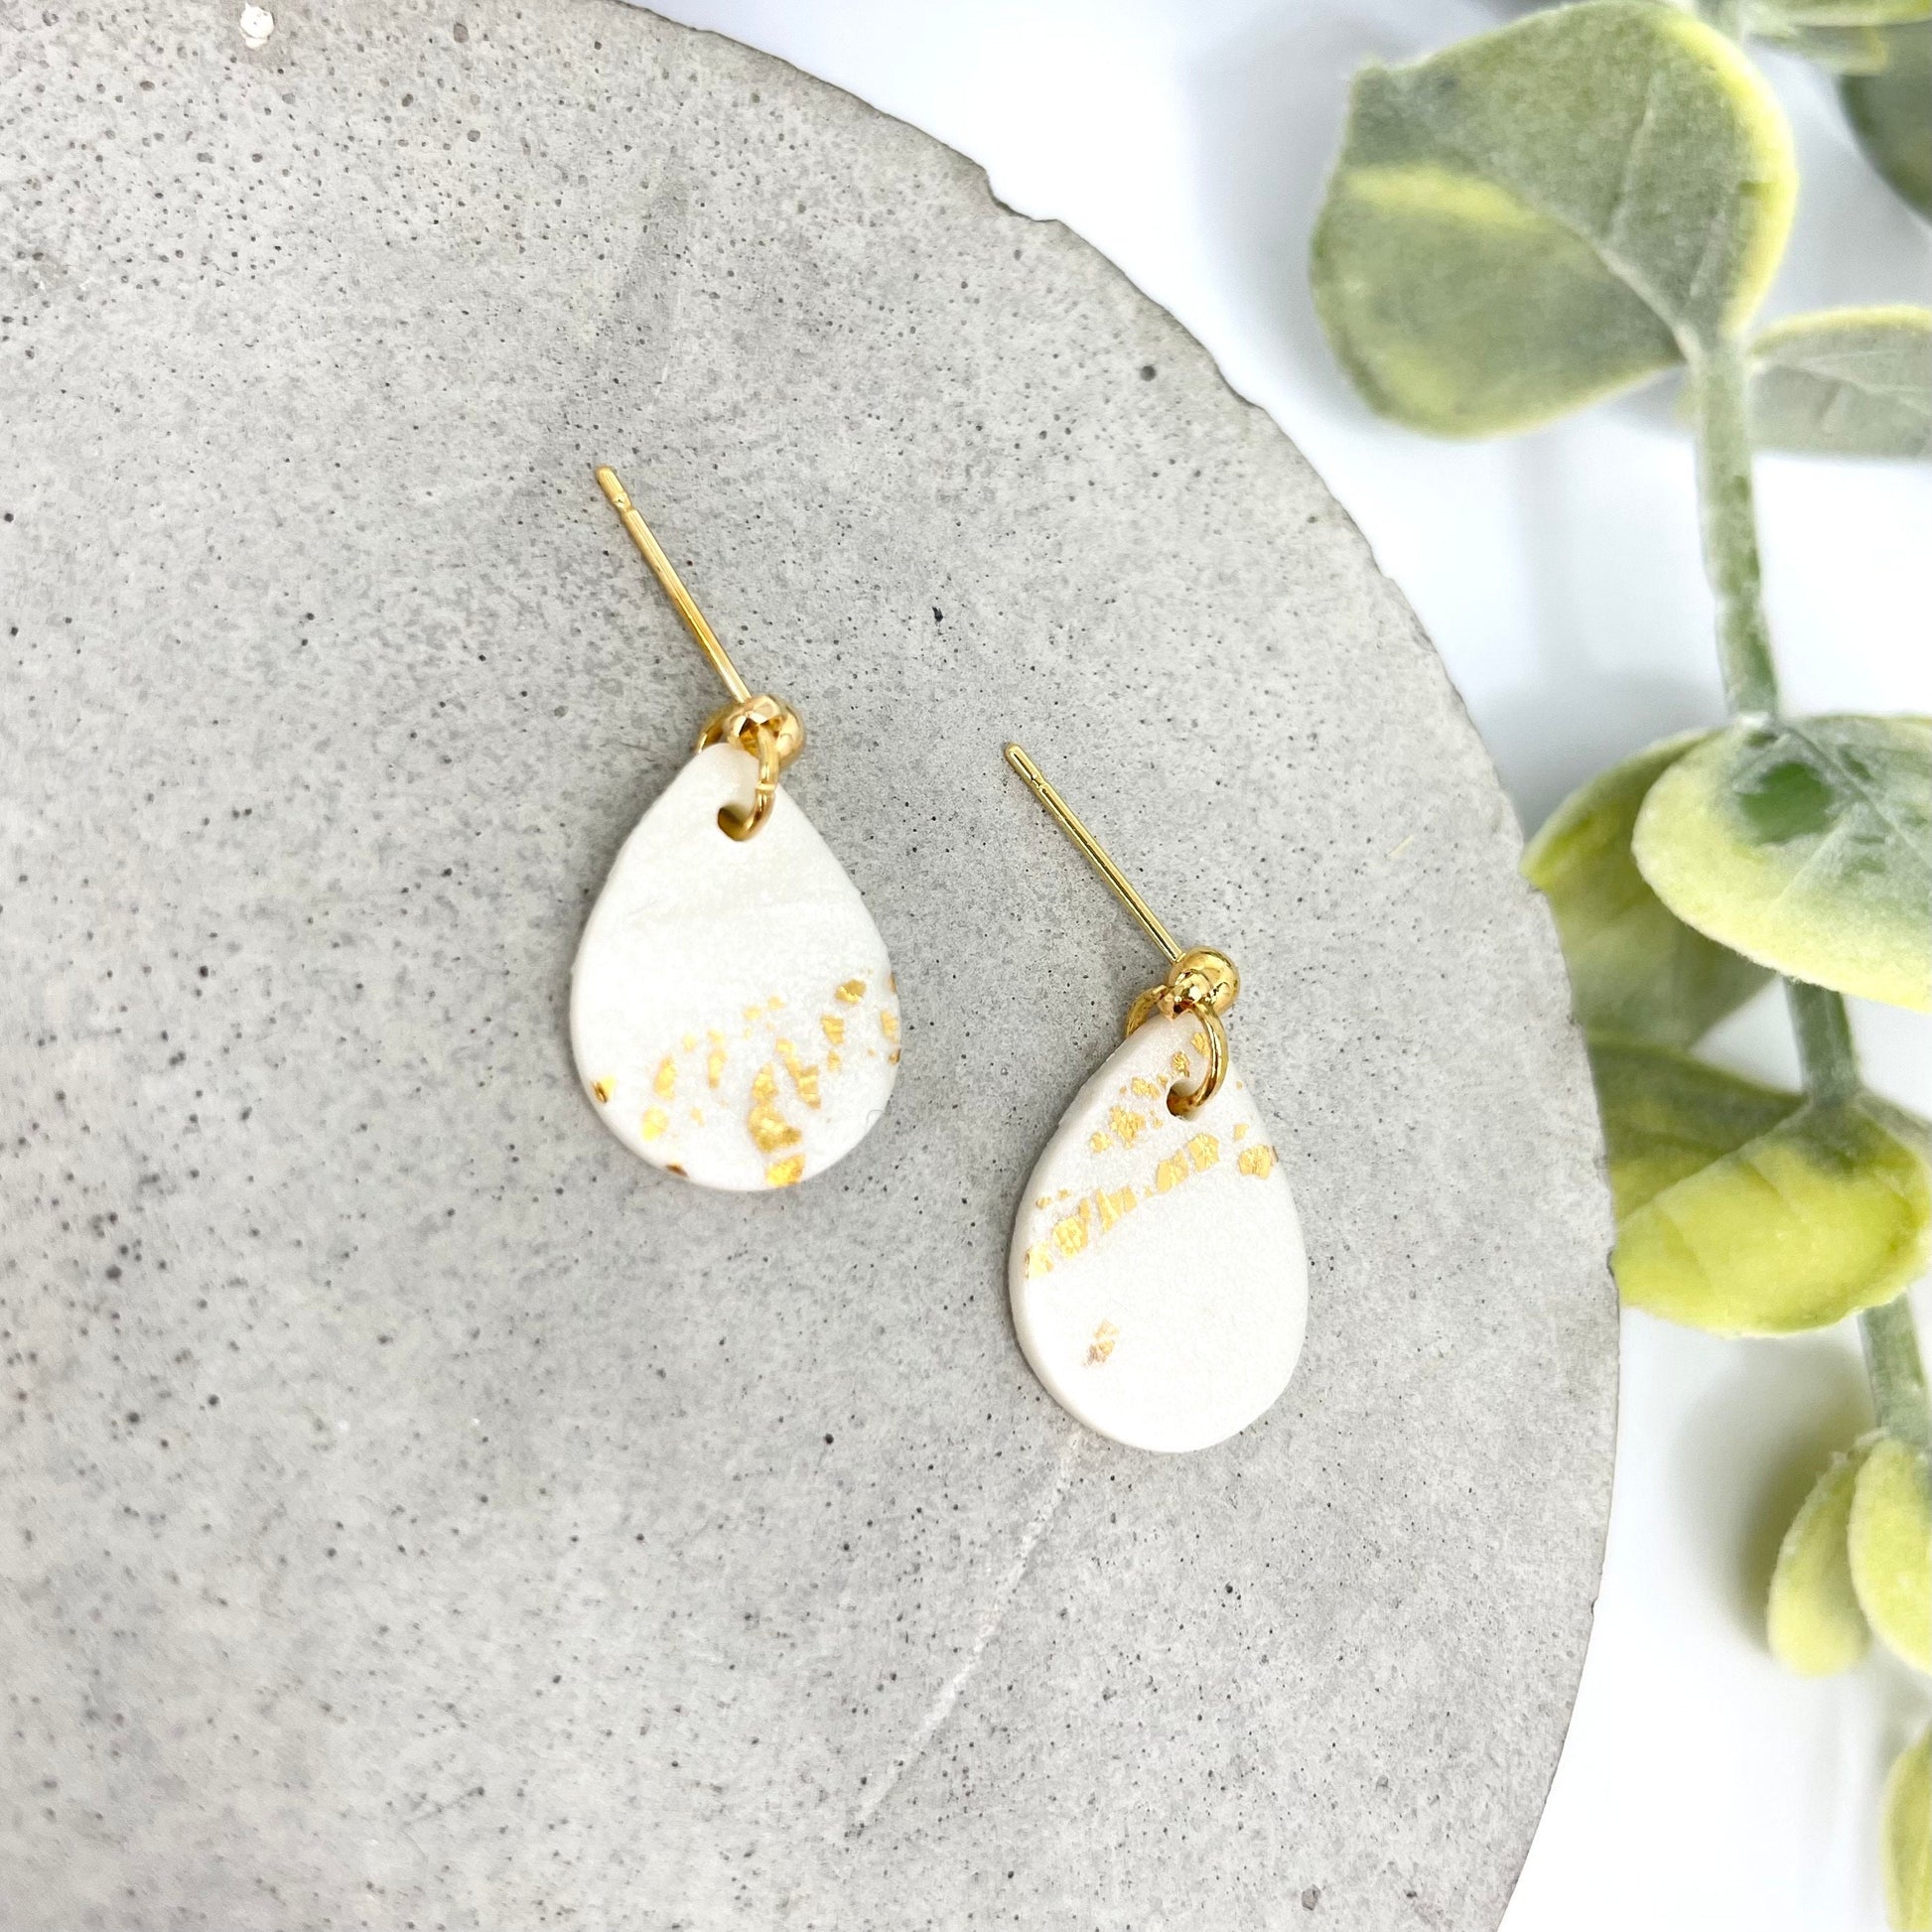 Beautiful Birthday gift earrings for her, gold leaf polymer clay dangle earrings, post box gift, best friend birthday gift, girlfriend gift,